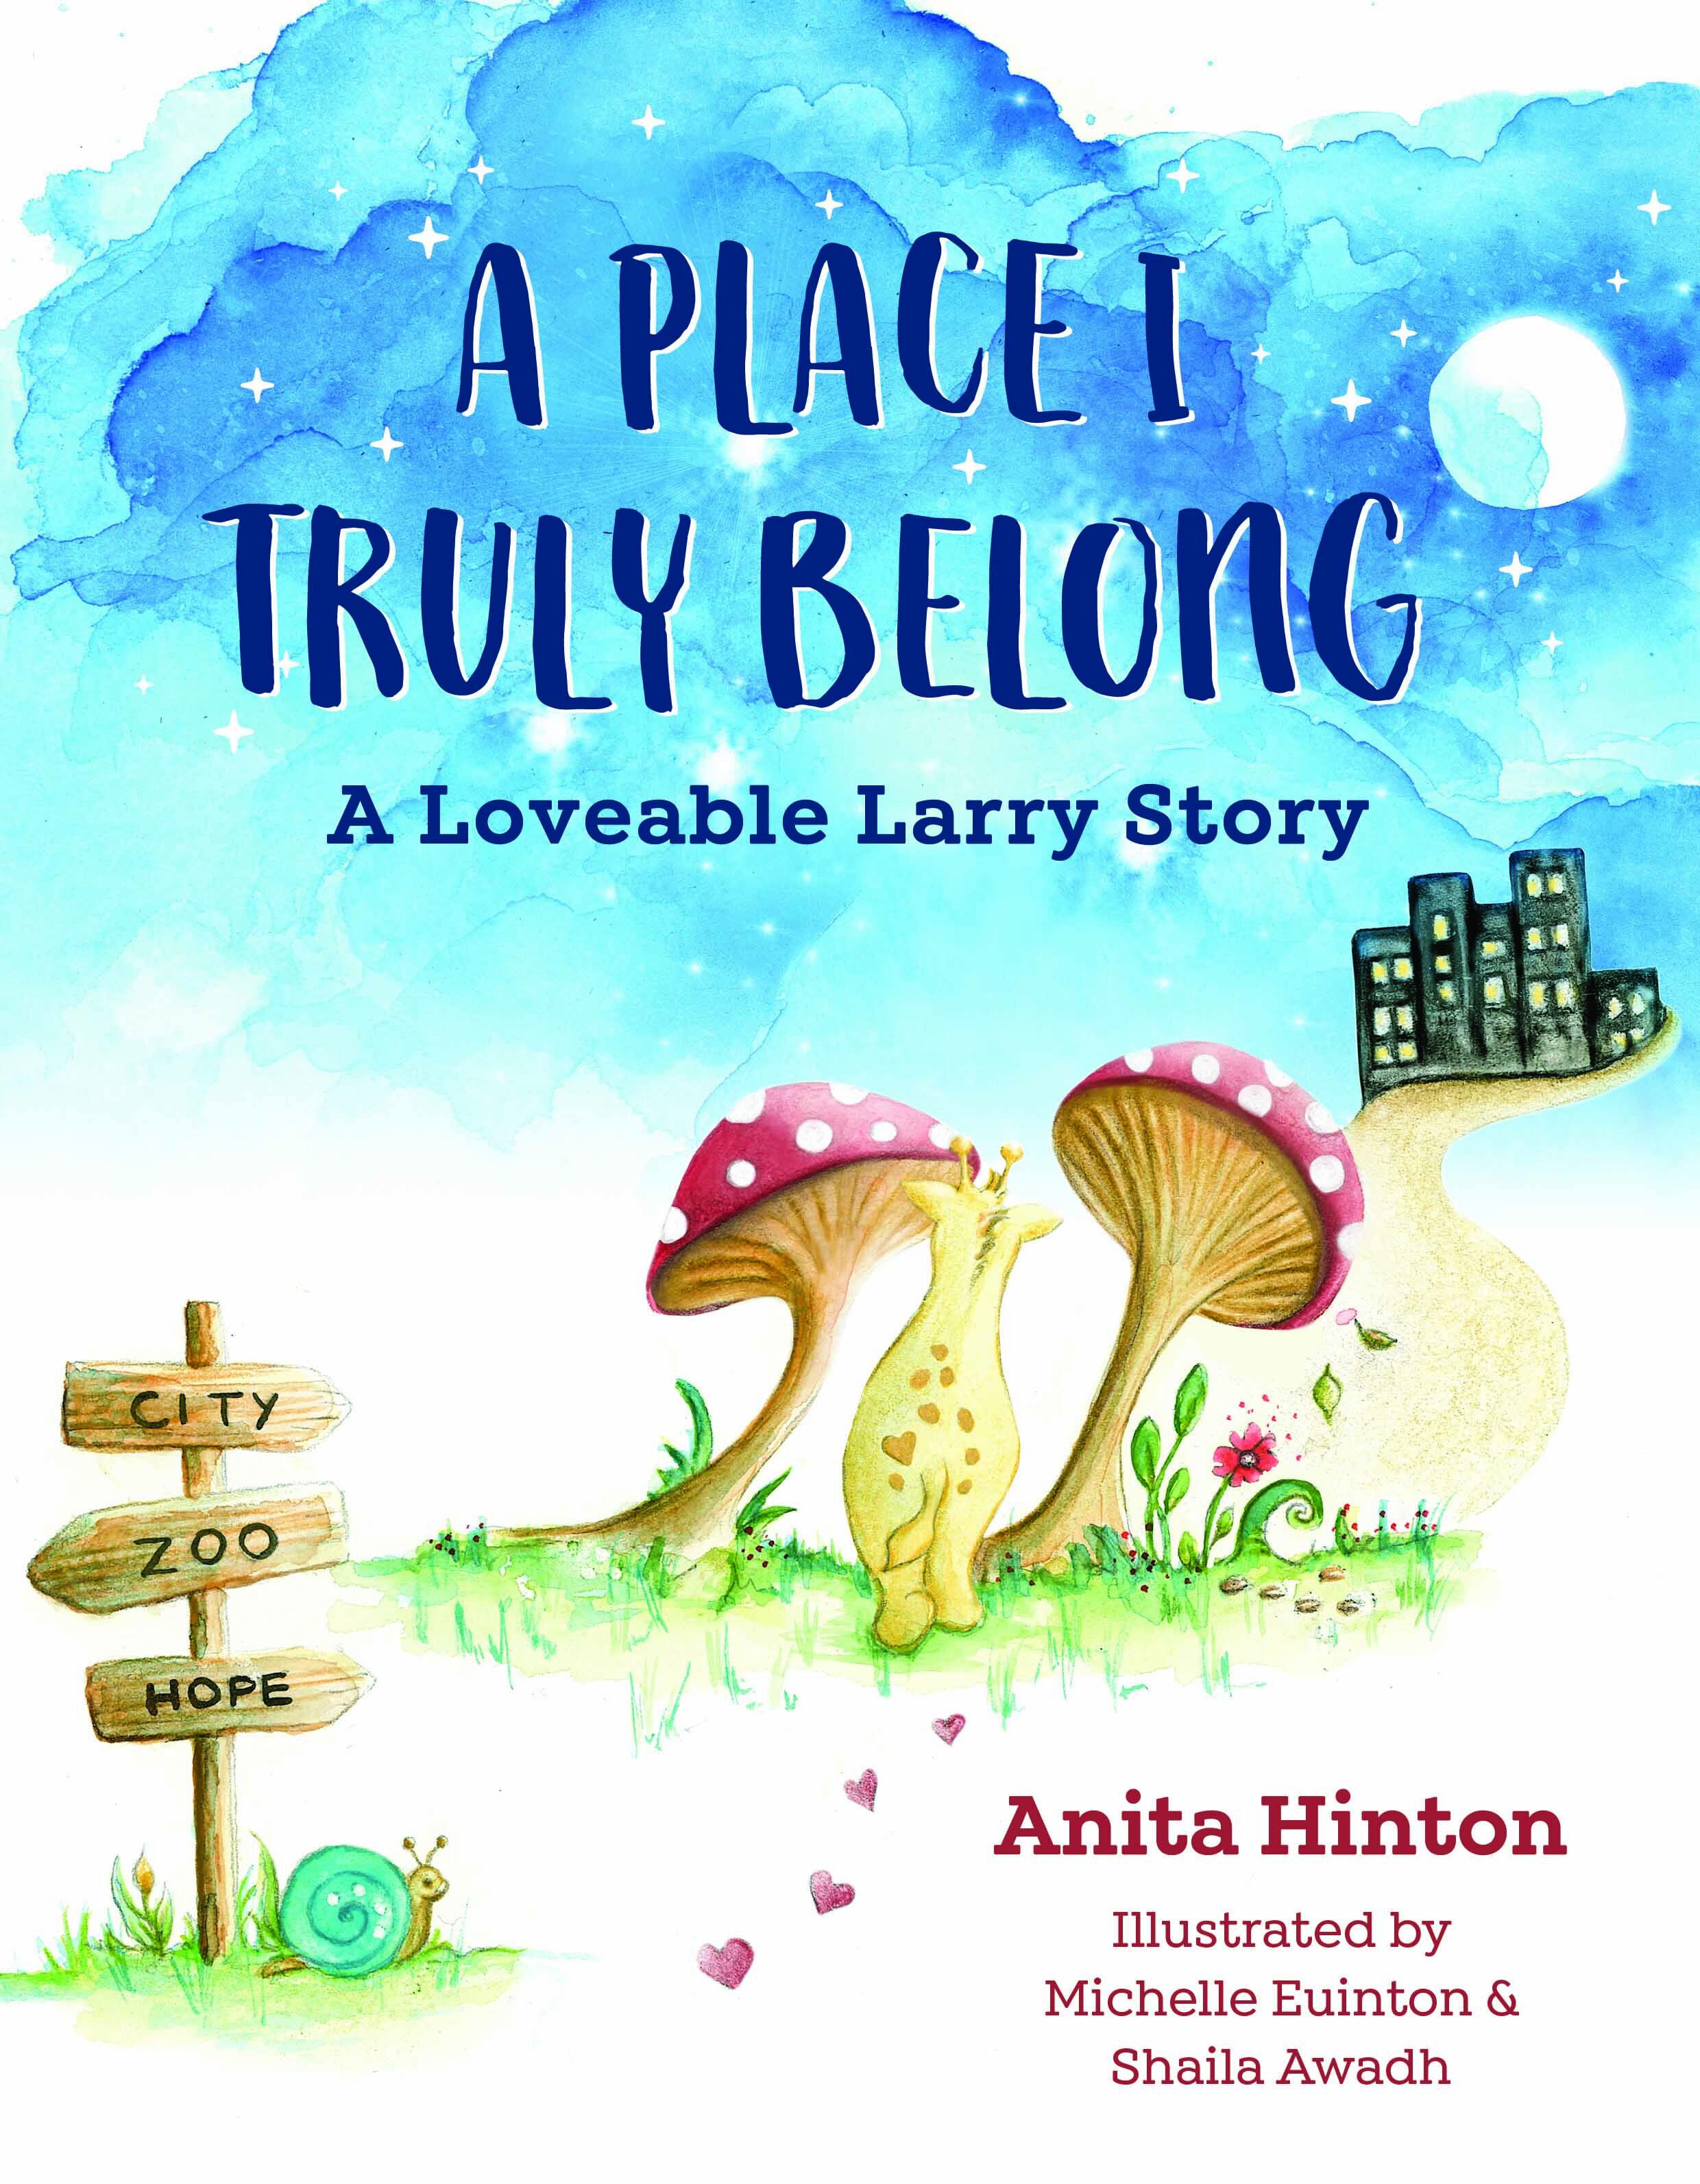  Published by Mary Egan Publishing.  Publication Date: November 1st 2021  Larry the giraffe lives in a zoo, but he’s not like the other giraffes.   Larry is small and soft and cuddly – and he feels different and alone.   One night, with the magic of 